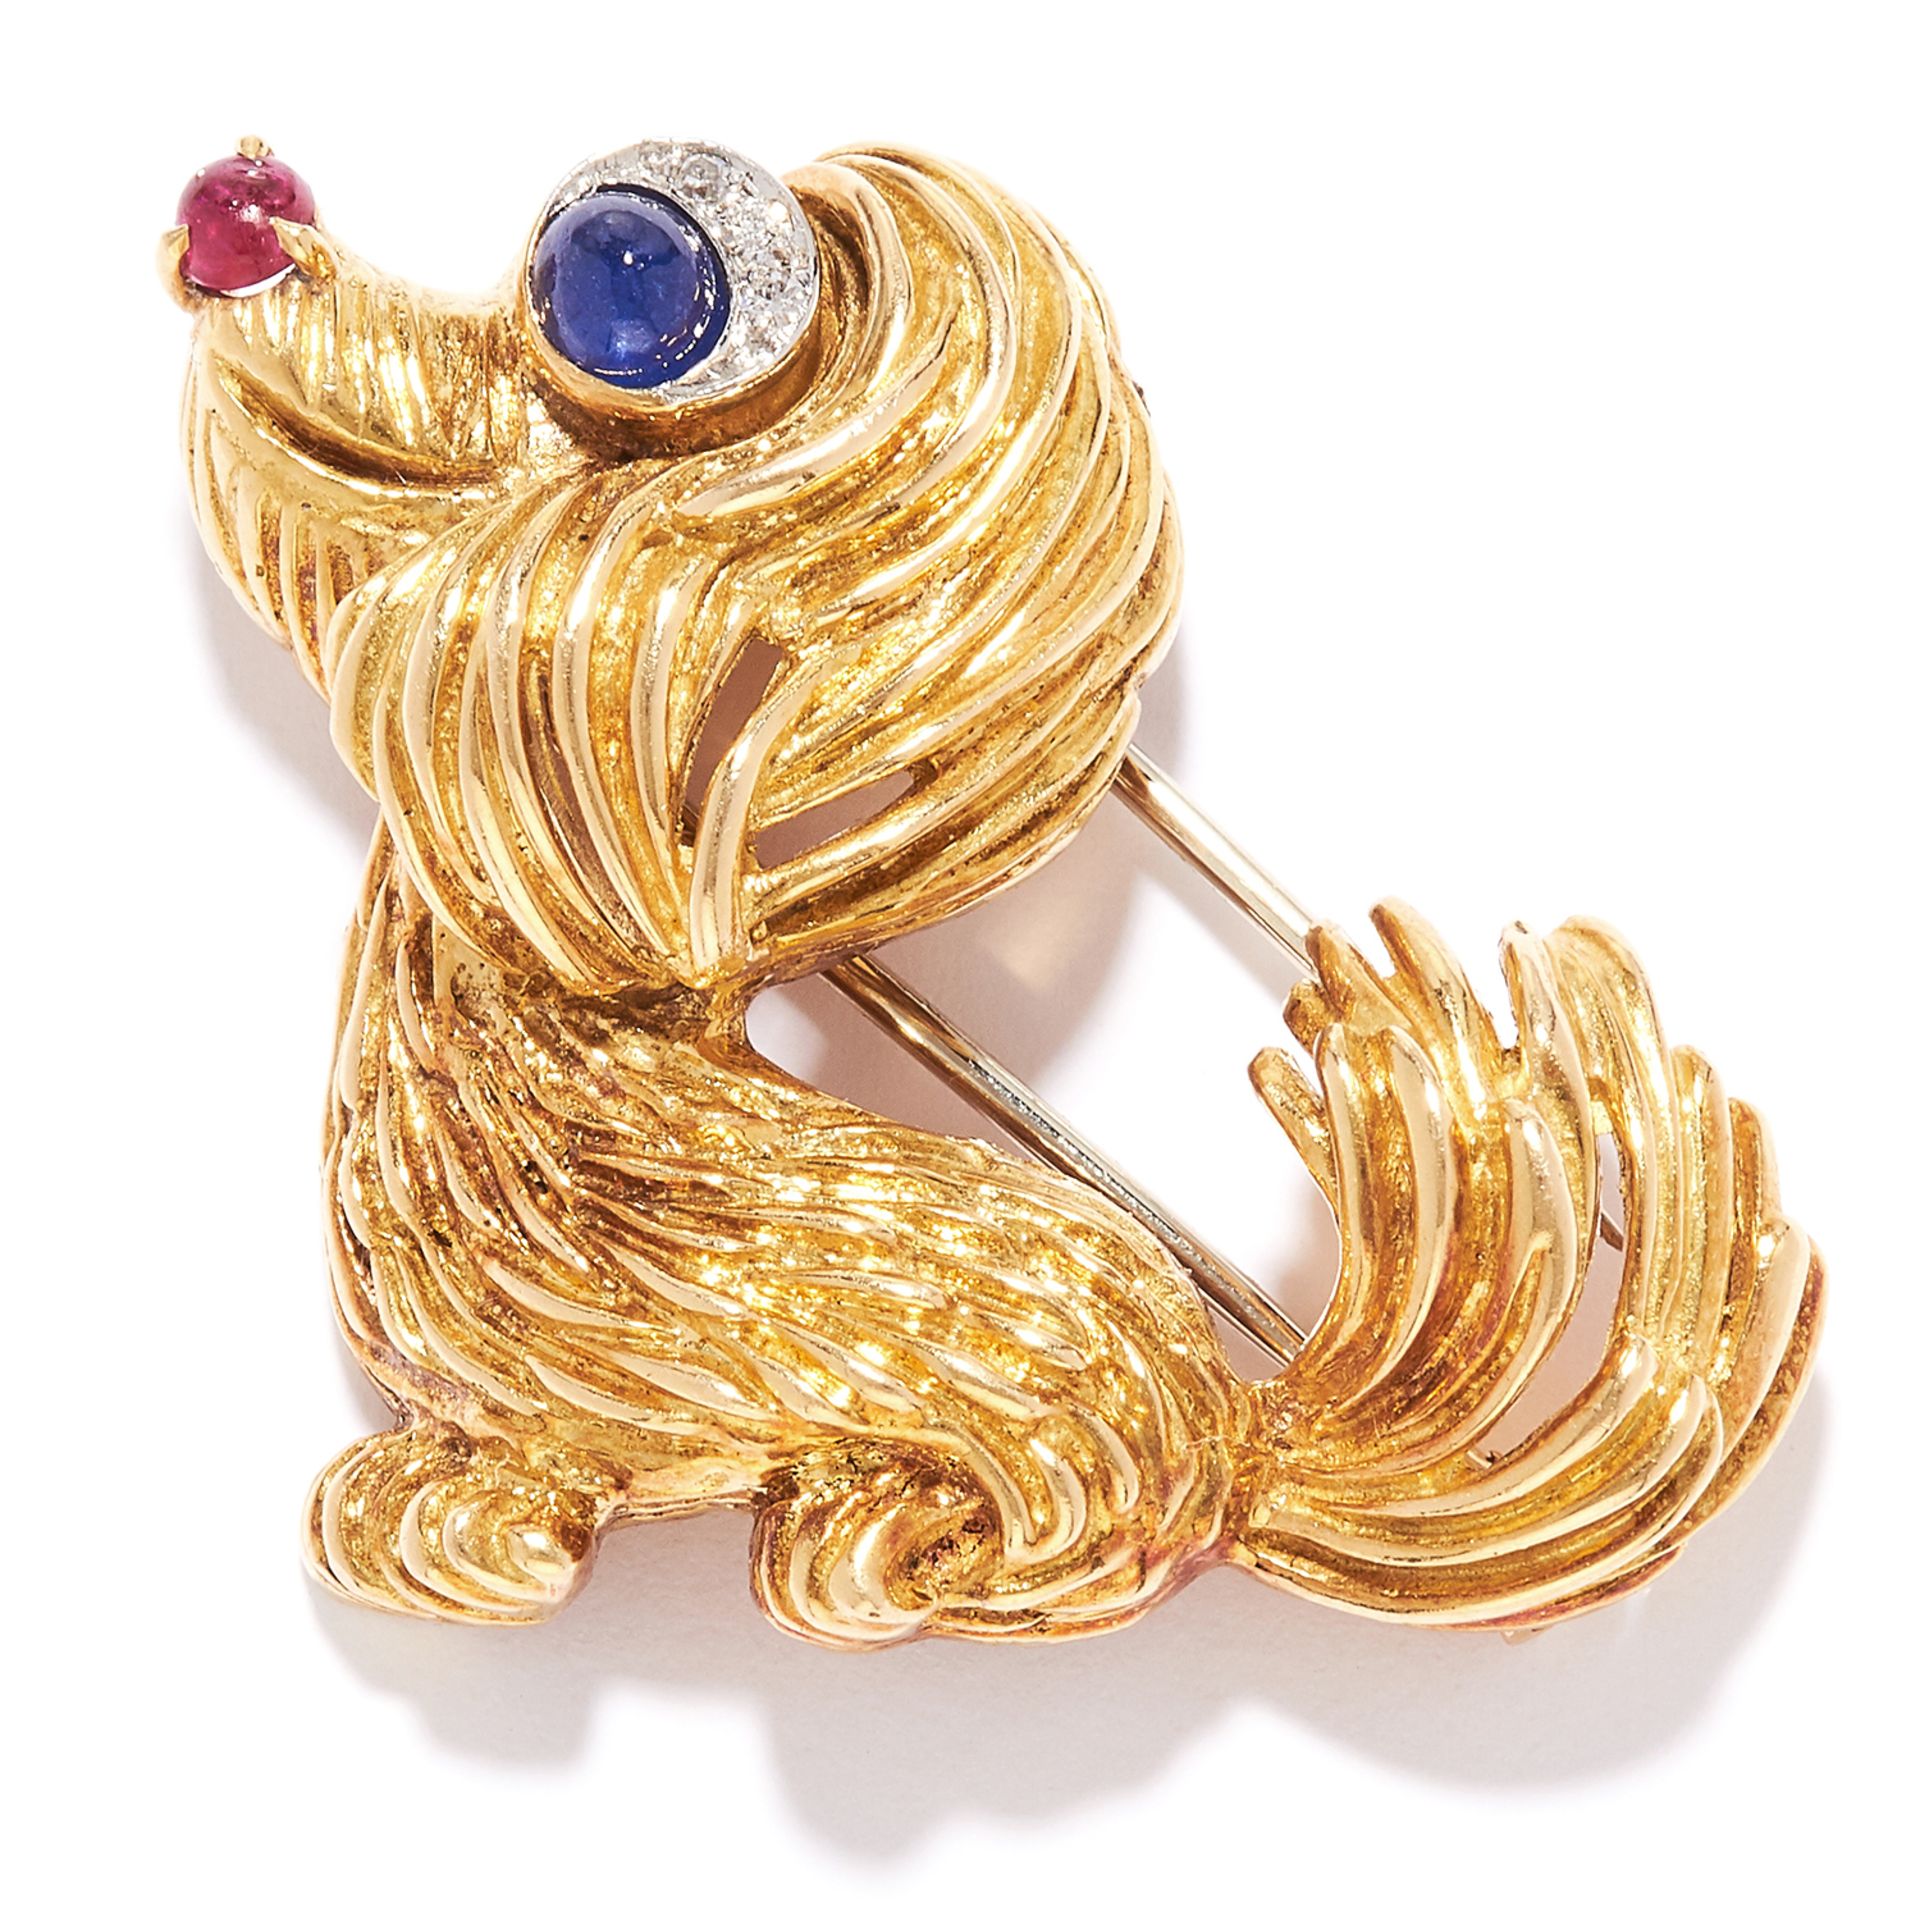 RUBY, SAPPHIRE AND DIAMOND NOVELTY DOG BROOCH in high carat yellow gold, depicting a dog, set with a